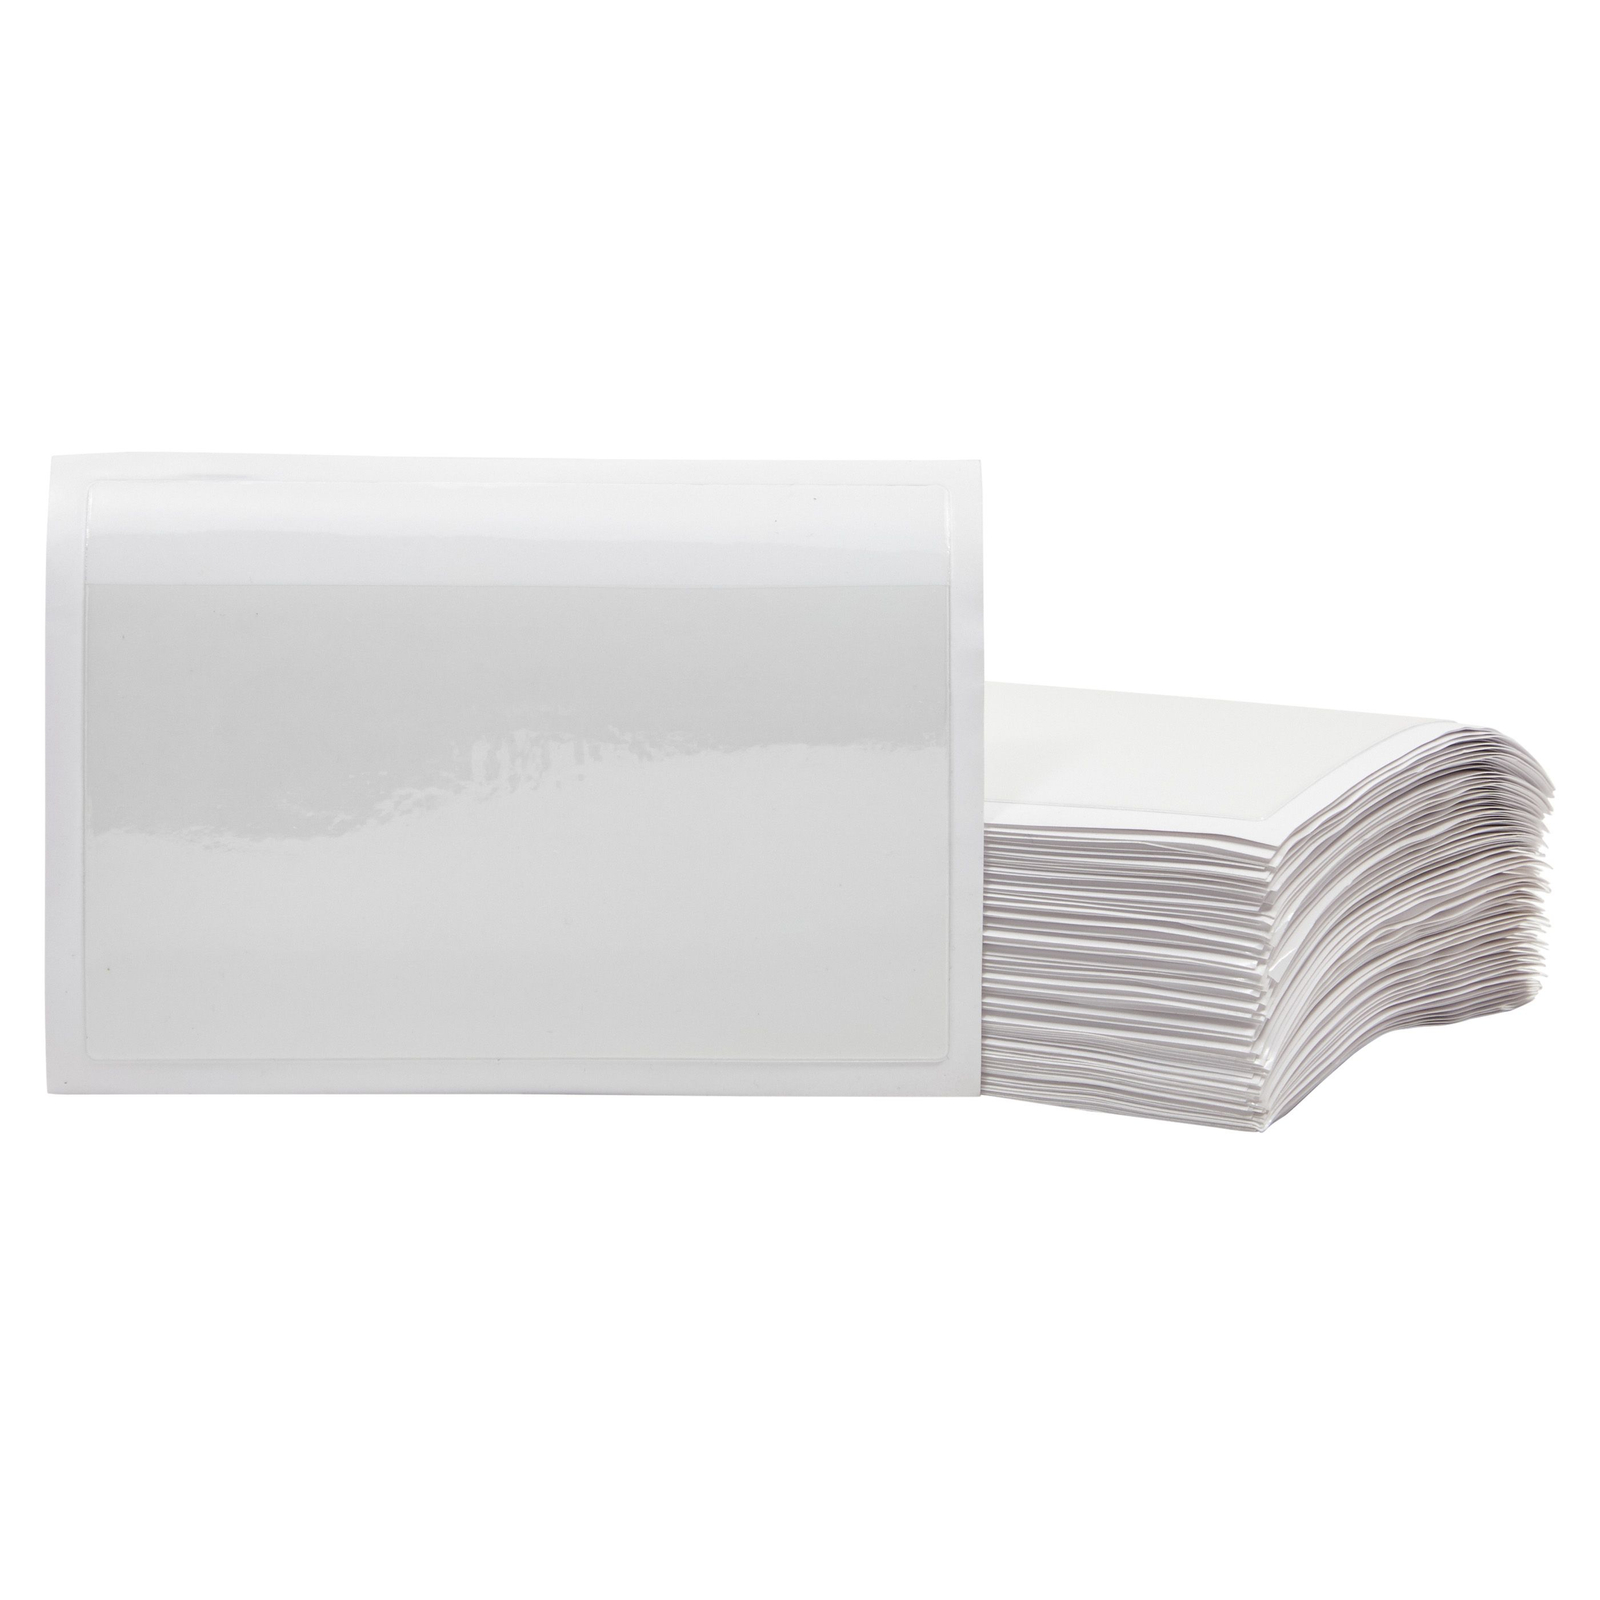 100 Pack Clear Self-Adhesive Pocket Label Holders for Index Cards 3x5, Bulk Top  Load Plastic Sleeves for Storage